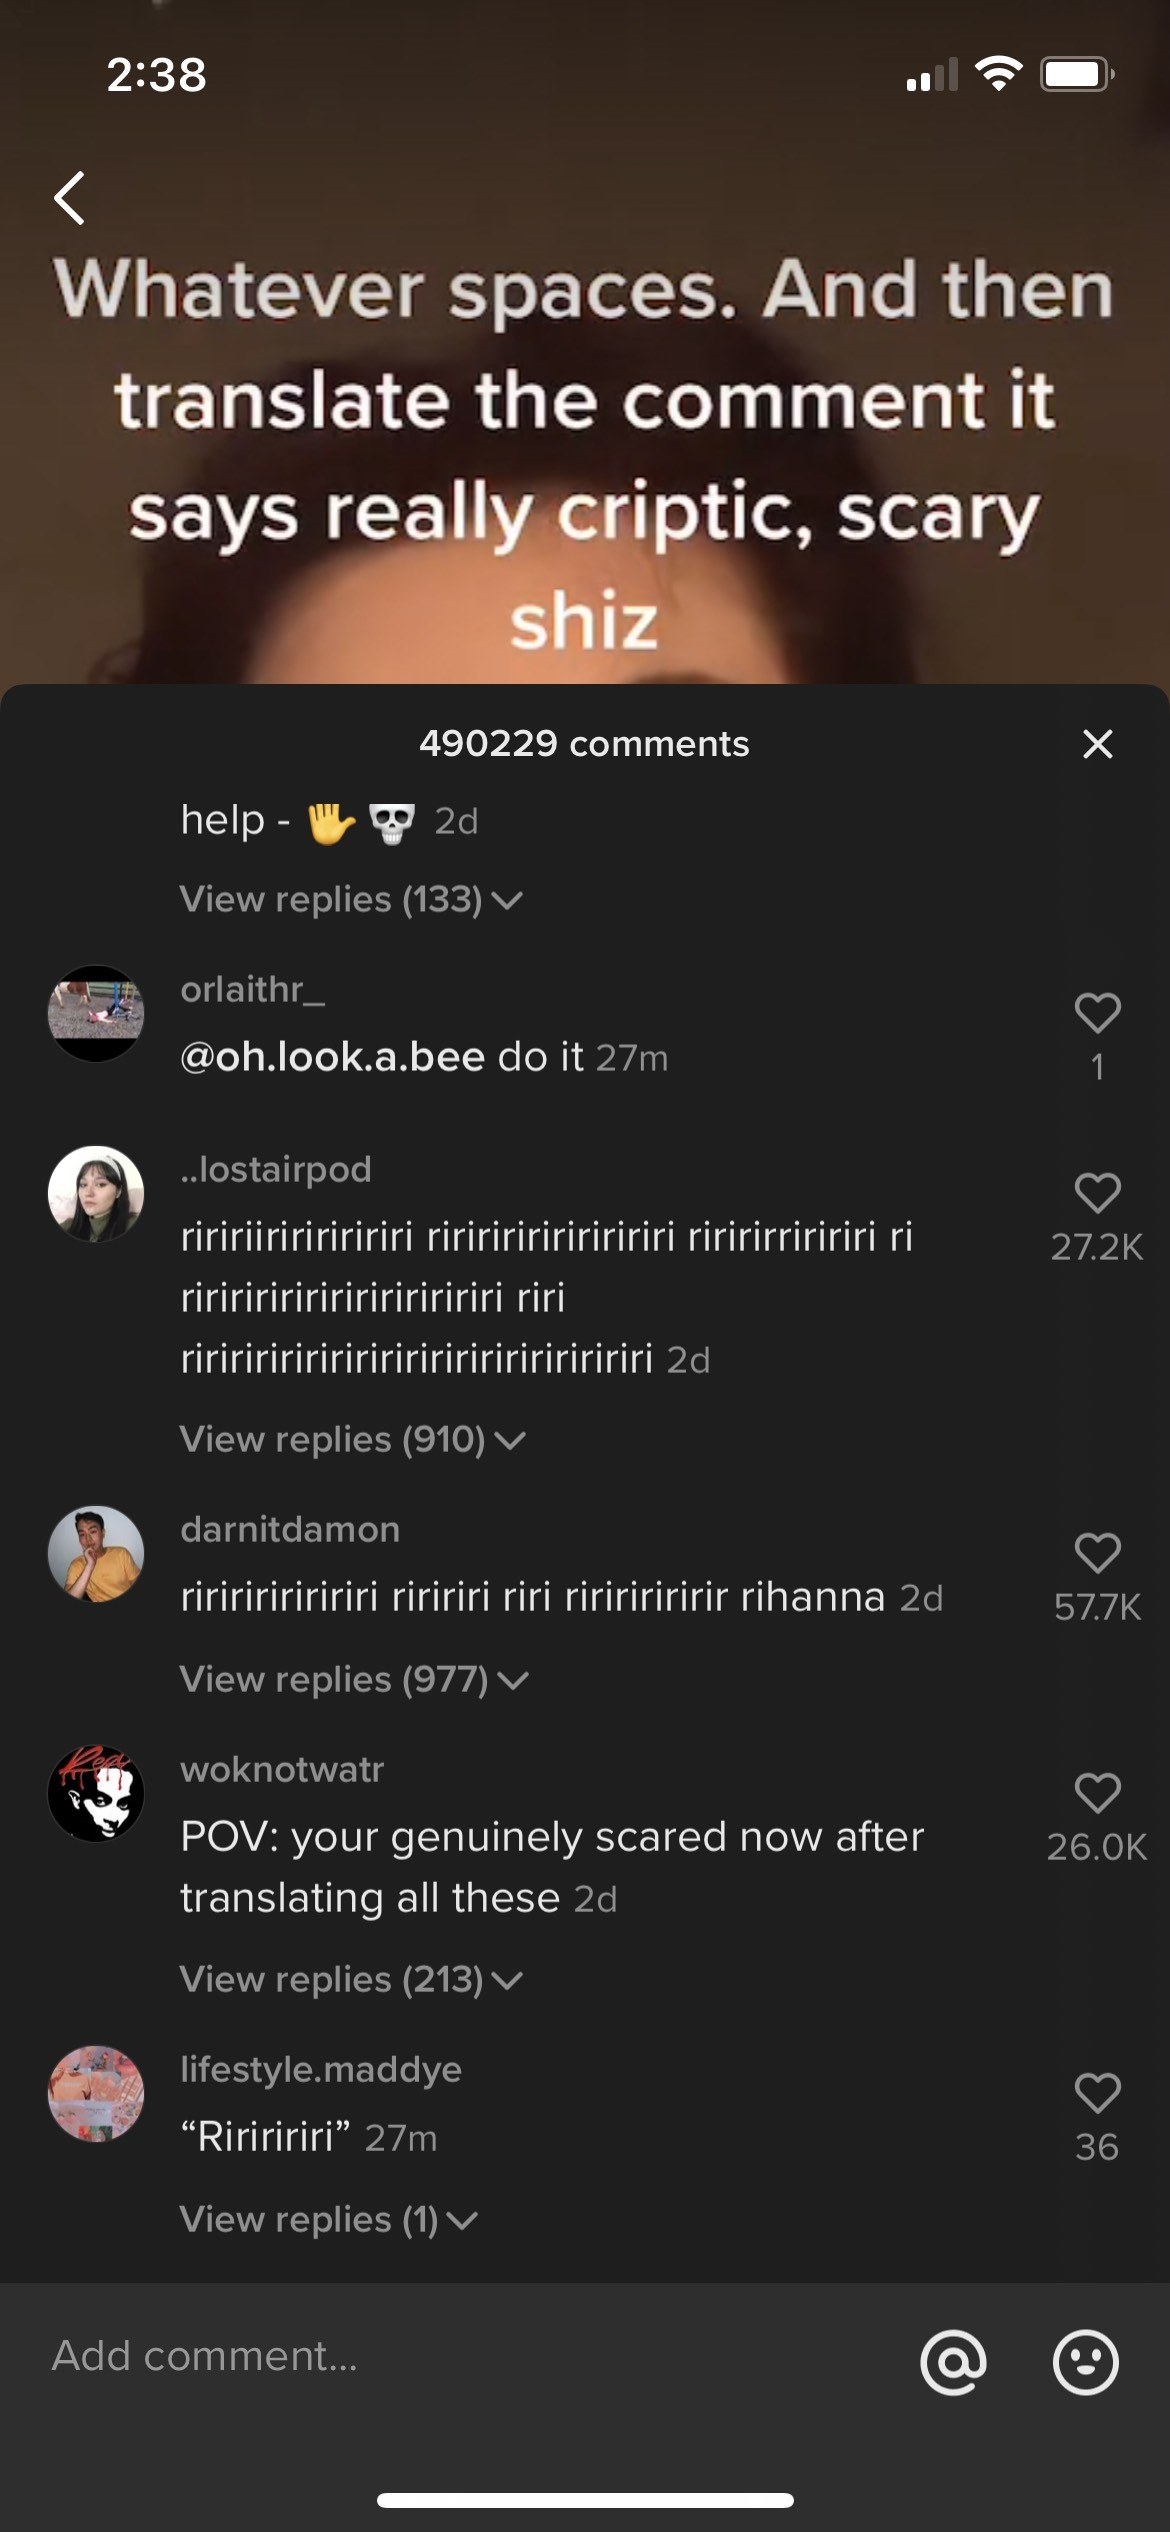 A set of comments with random &quot;ririri&quot; strings, one of them with &quot;Rihanna&quot; at the end